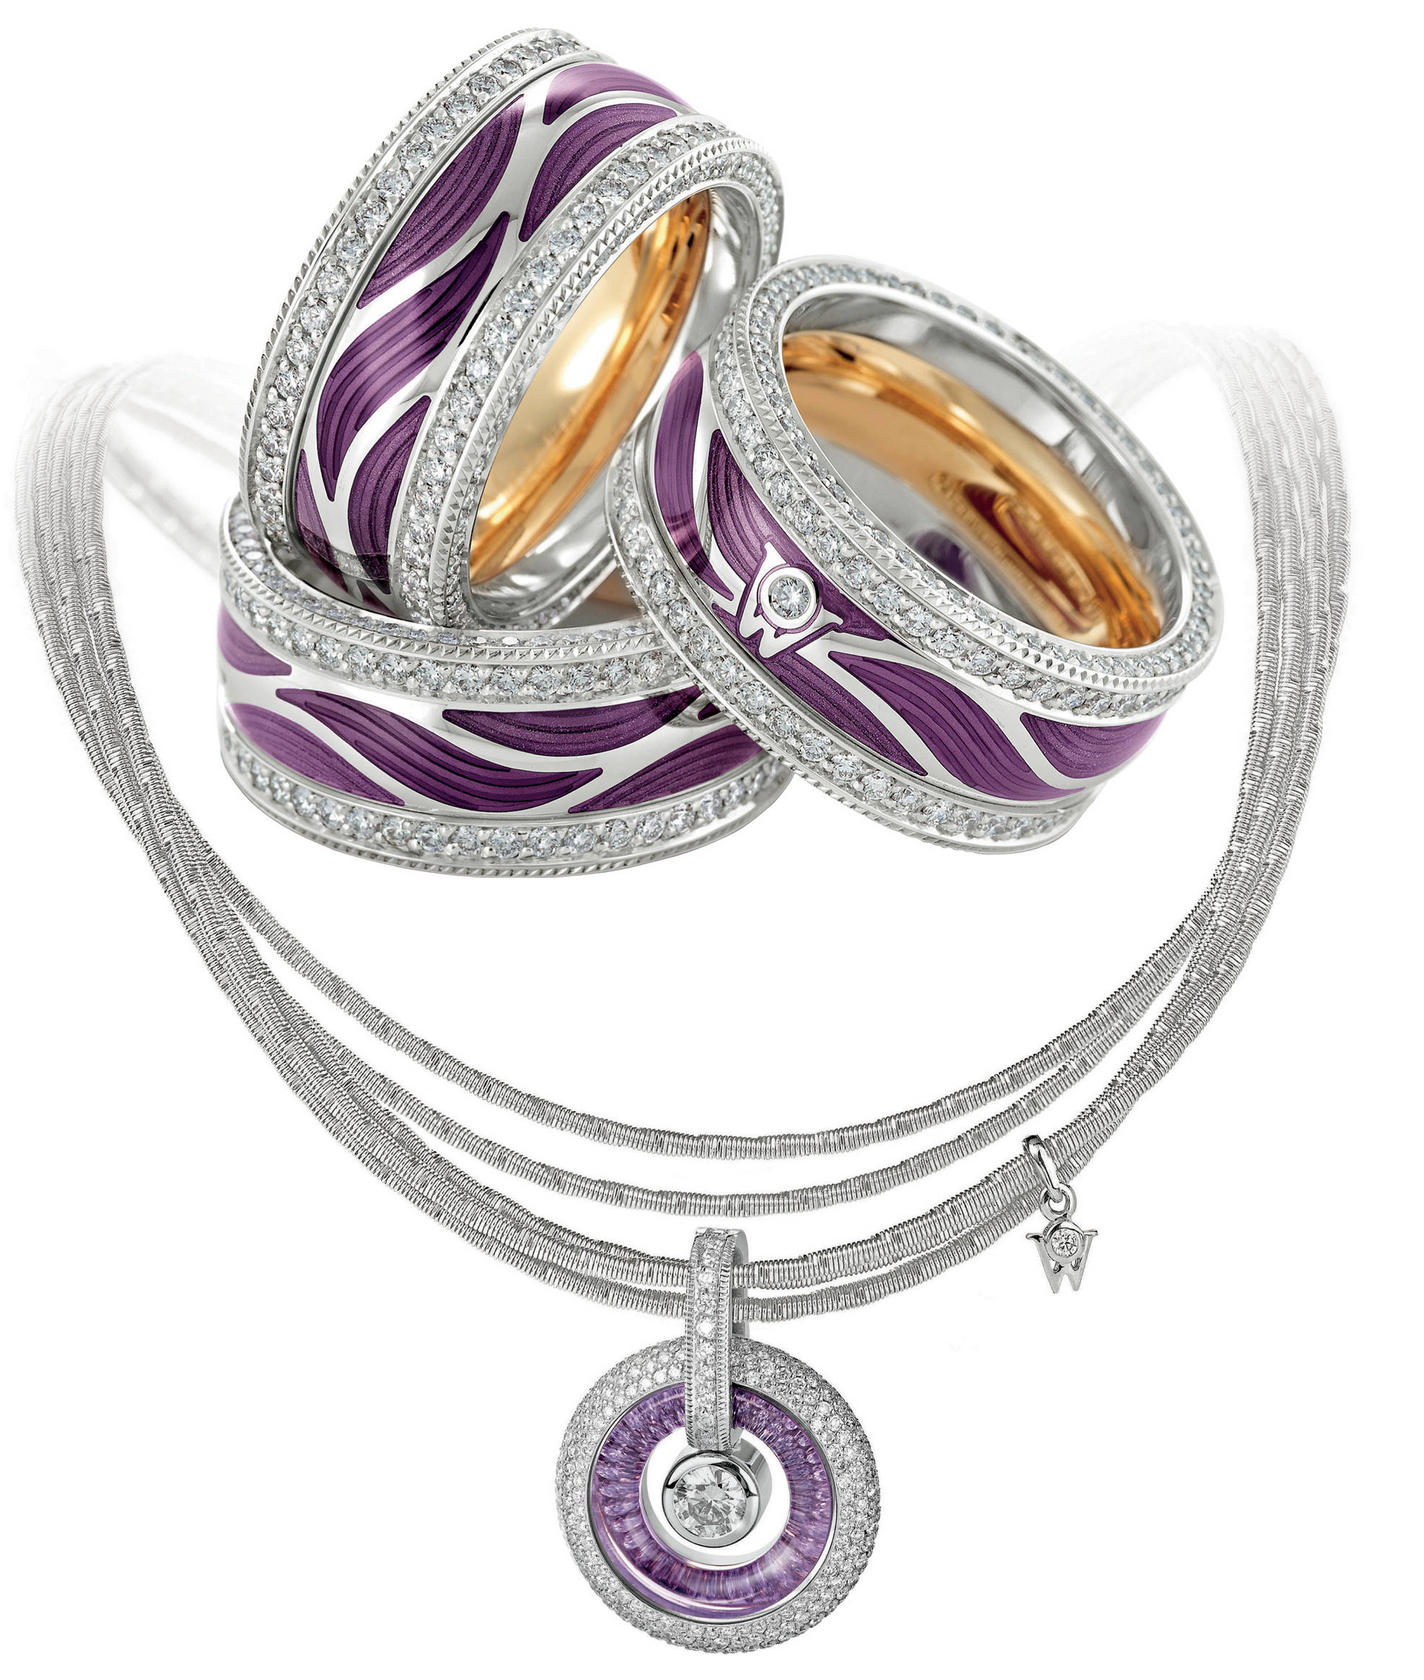 Lady luxe The Germans are not known for their fine jewellery but an exception is the family-run Wellendorff brand, which, for its 120th anniversary, has delved deep into the history books to bring us this limited-edition range of incredibly detailed, opulent pieces, including the Amulet of Harmony (below right; HK$617,000) and the Magic of Harmony ring (above right; HK$255,000). The necklace features a meticulously cut transparent ring of amethyst inside a pedant set with pavé diamonds. Wellendorff is in IFC Mall, Central, tel: 2540 1028.